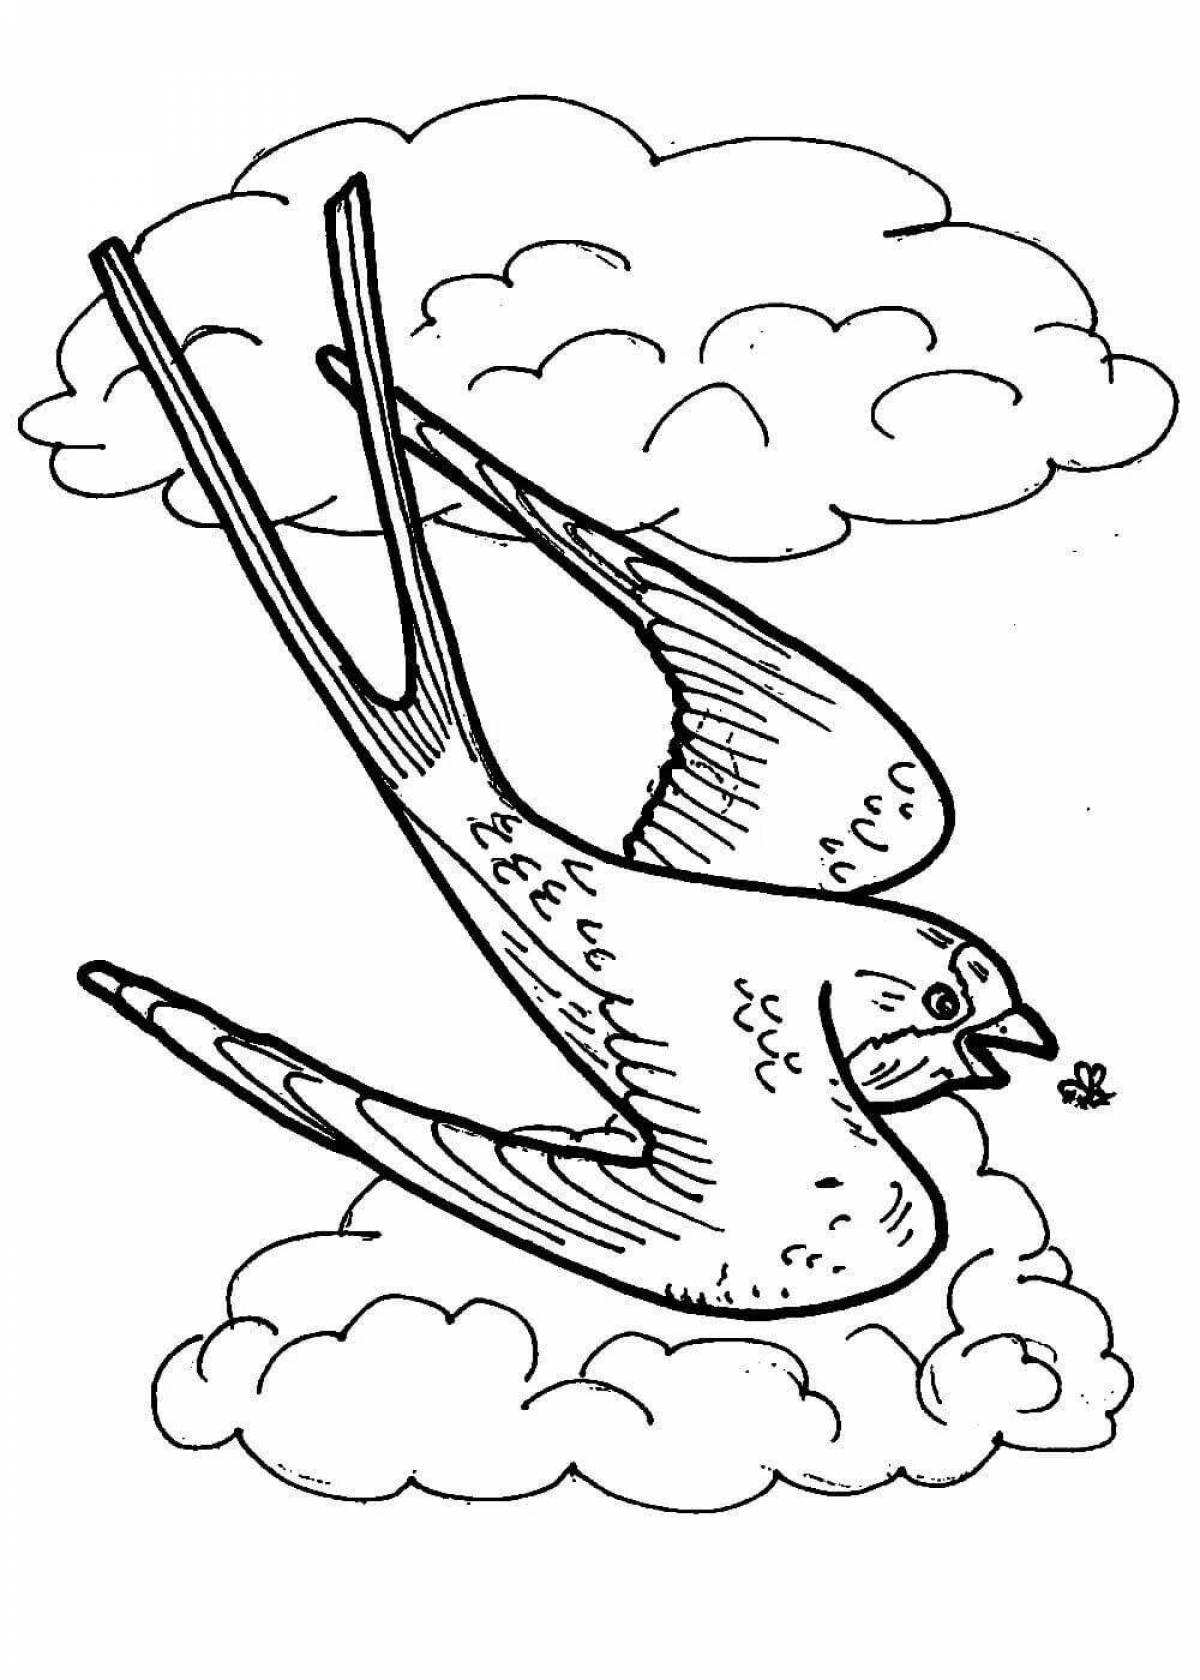 Coloring pages of migratory birds for kids